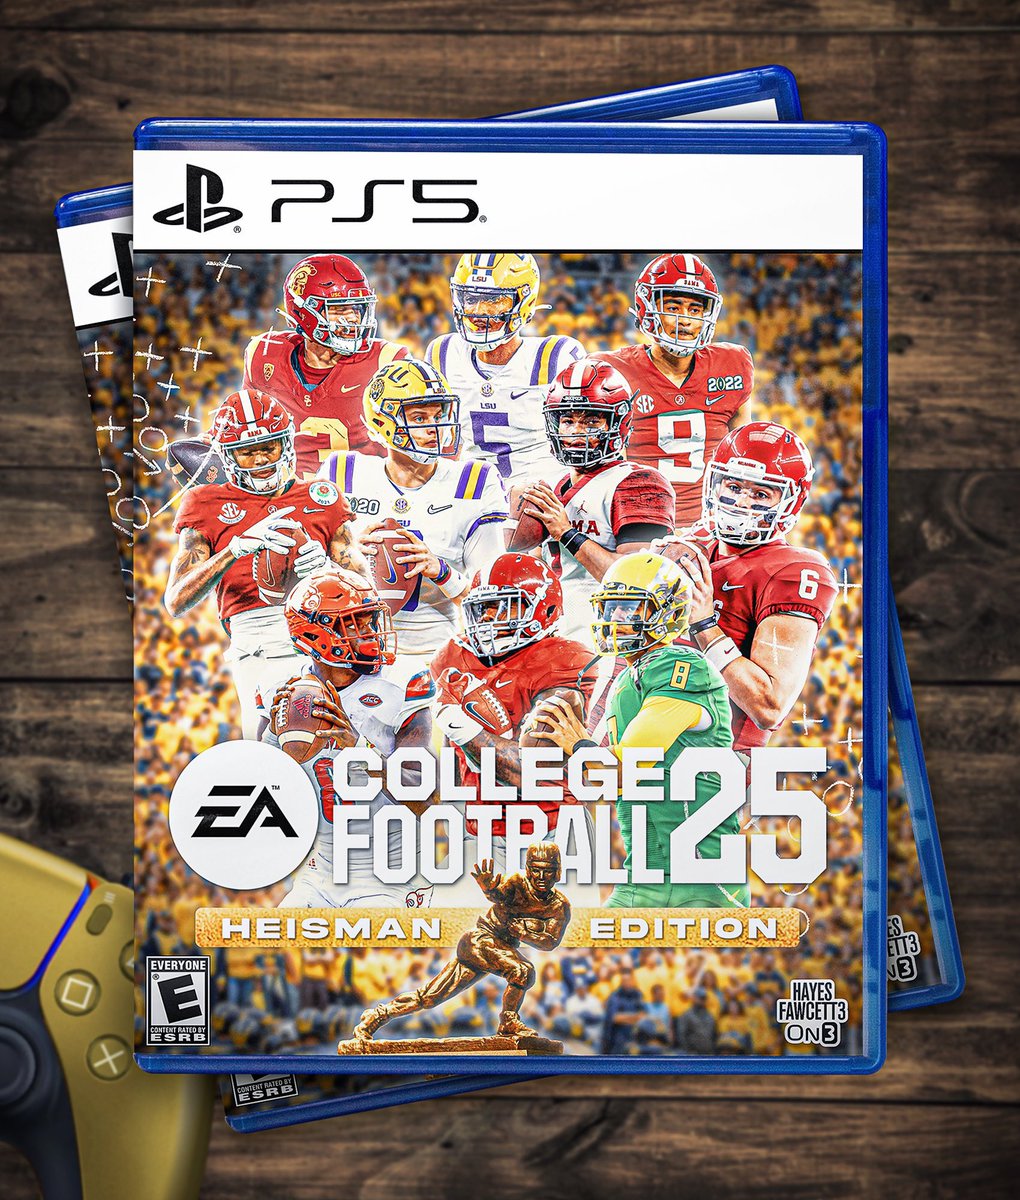 If EA doesn’t make the CFB 25 “Heisman Edition” cover like this, they have it all wrong